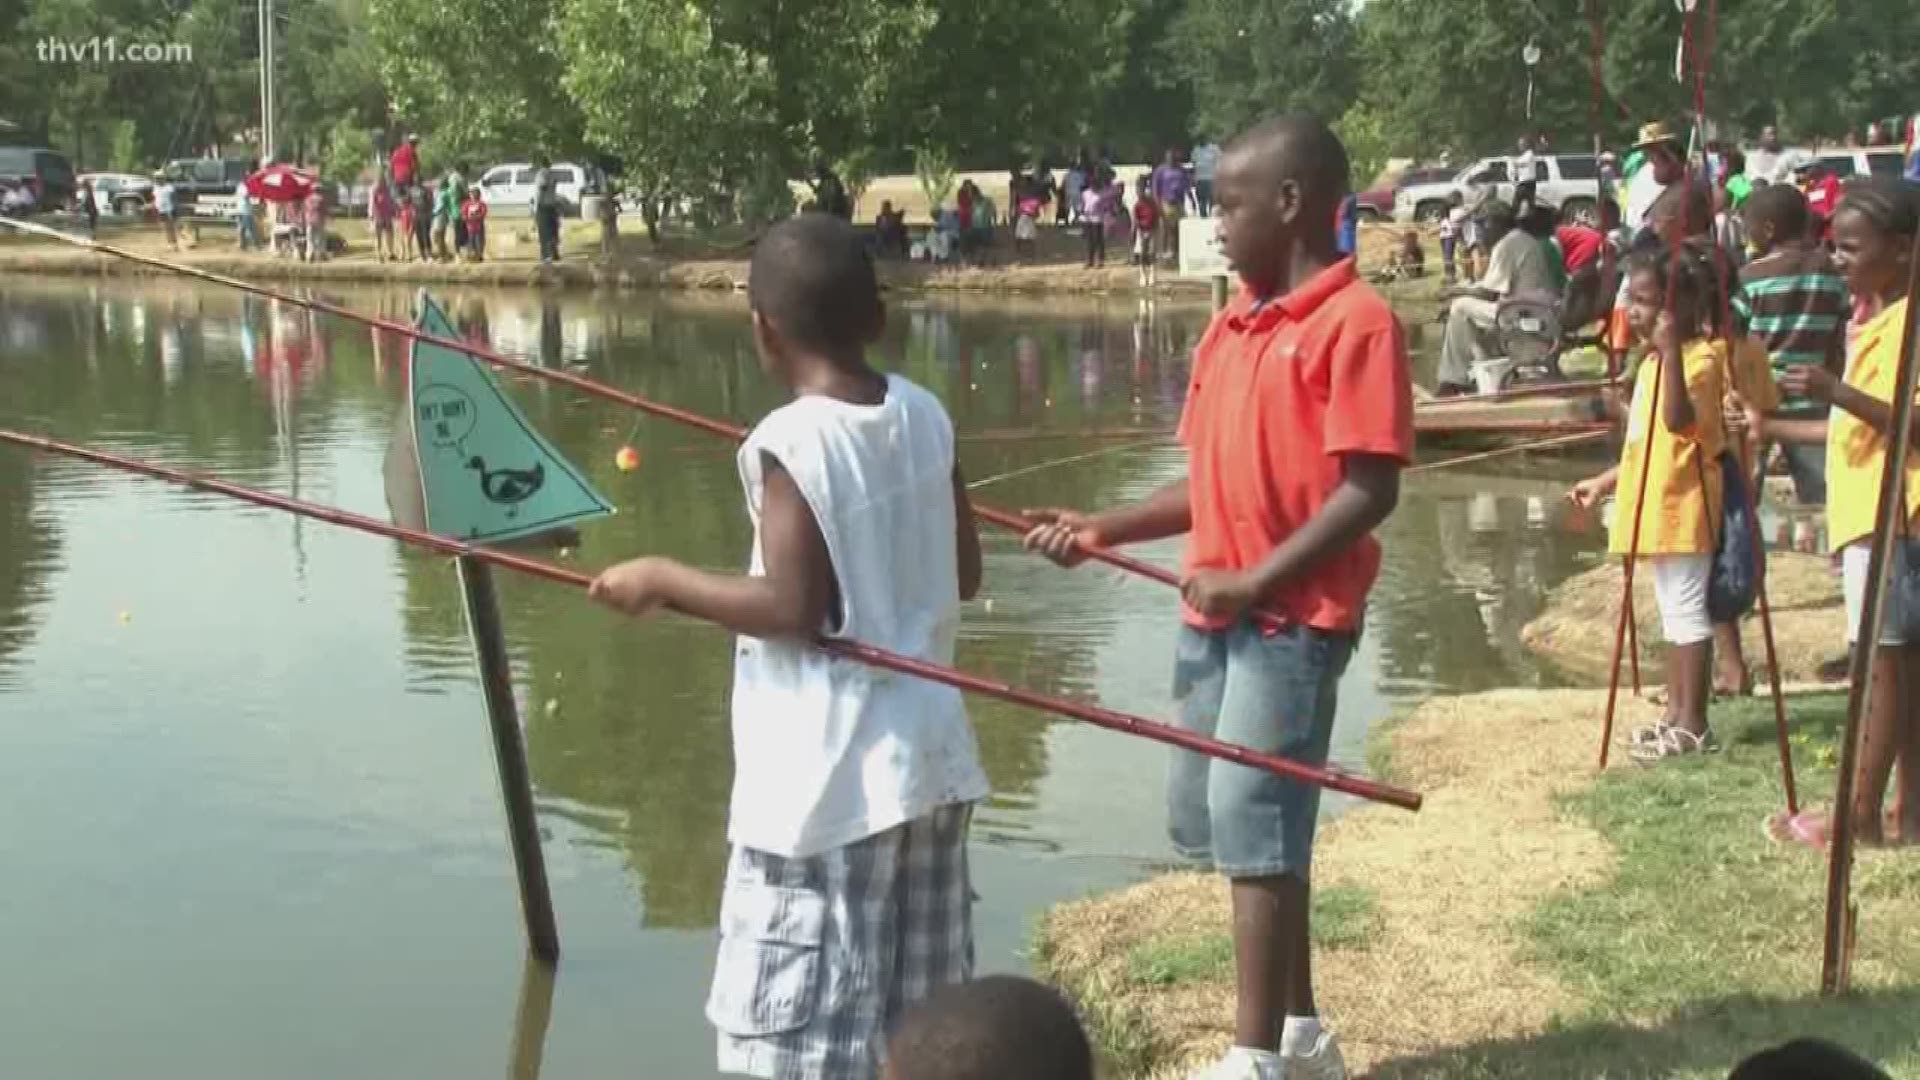 Arkansas Game and Fish is opening Western Hills pond in Southwest Little Rock, as well as hosting the Arkansas Youth Shooting Sports Regionals.